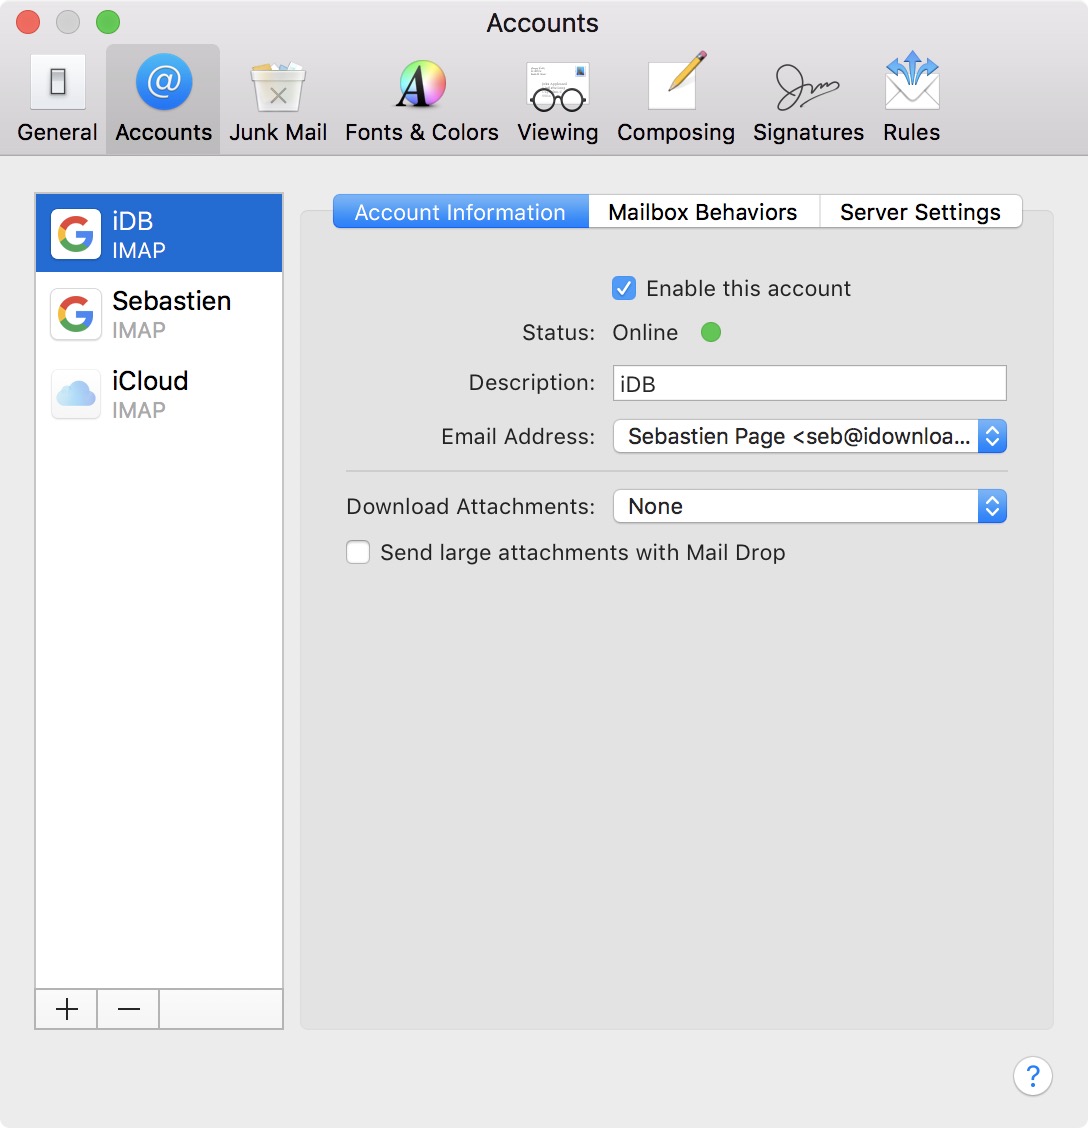 downloading attachments in outlook for mac